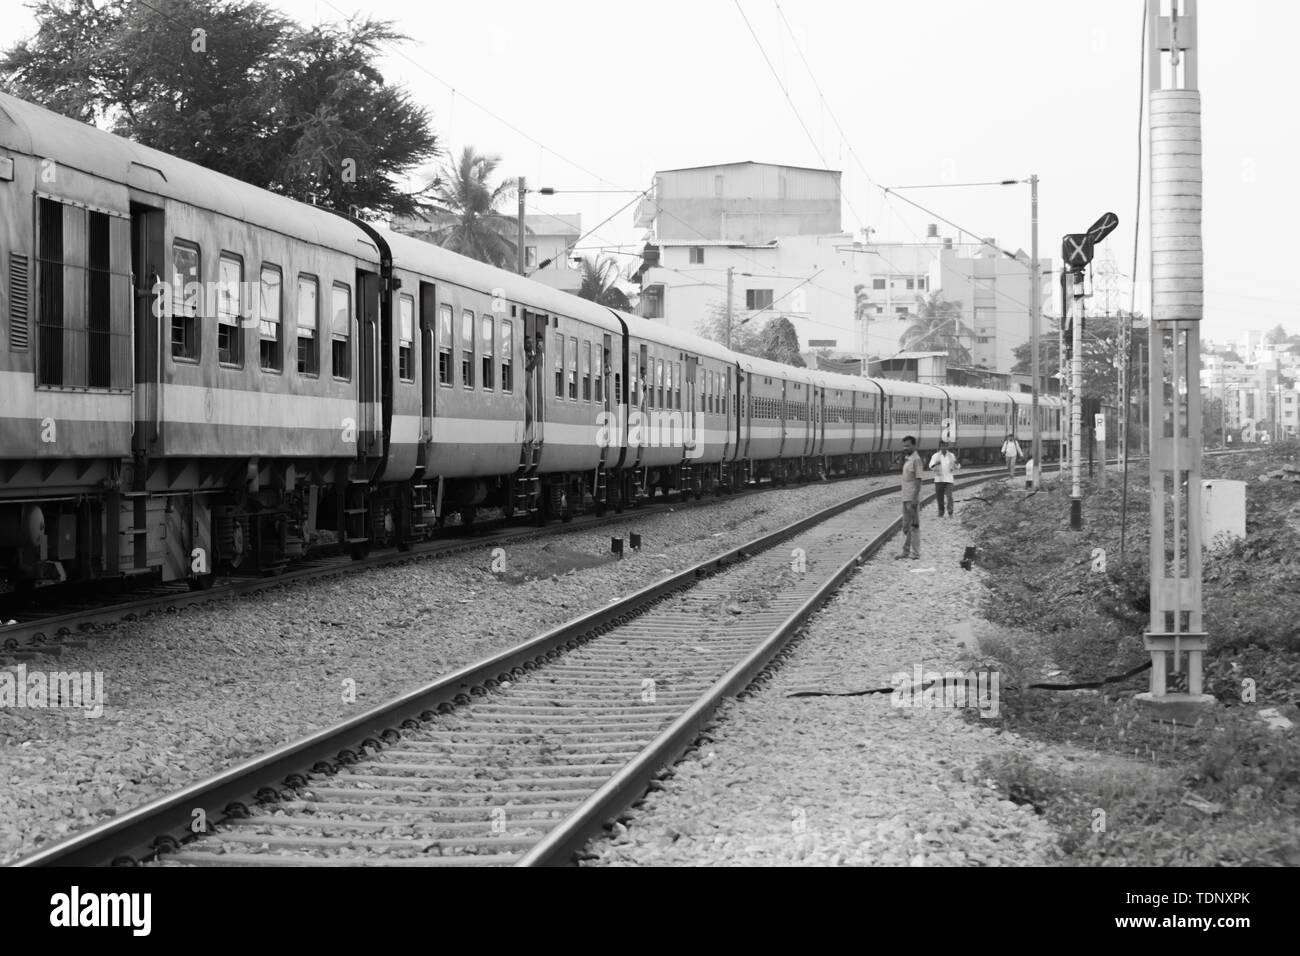 BANGALORE INDIA June 1, 2019 :Monochrome image of People standing on edge of the staircase steps of moving Train at Bengaluru due to non availablity o Stock Photo